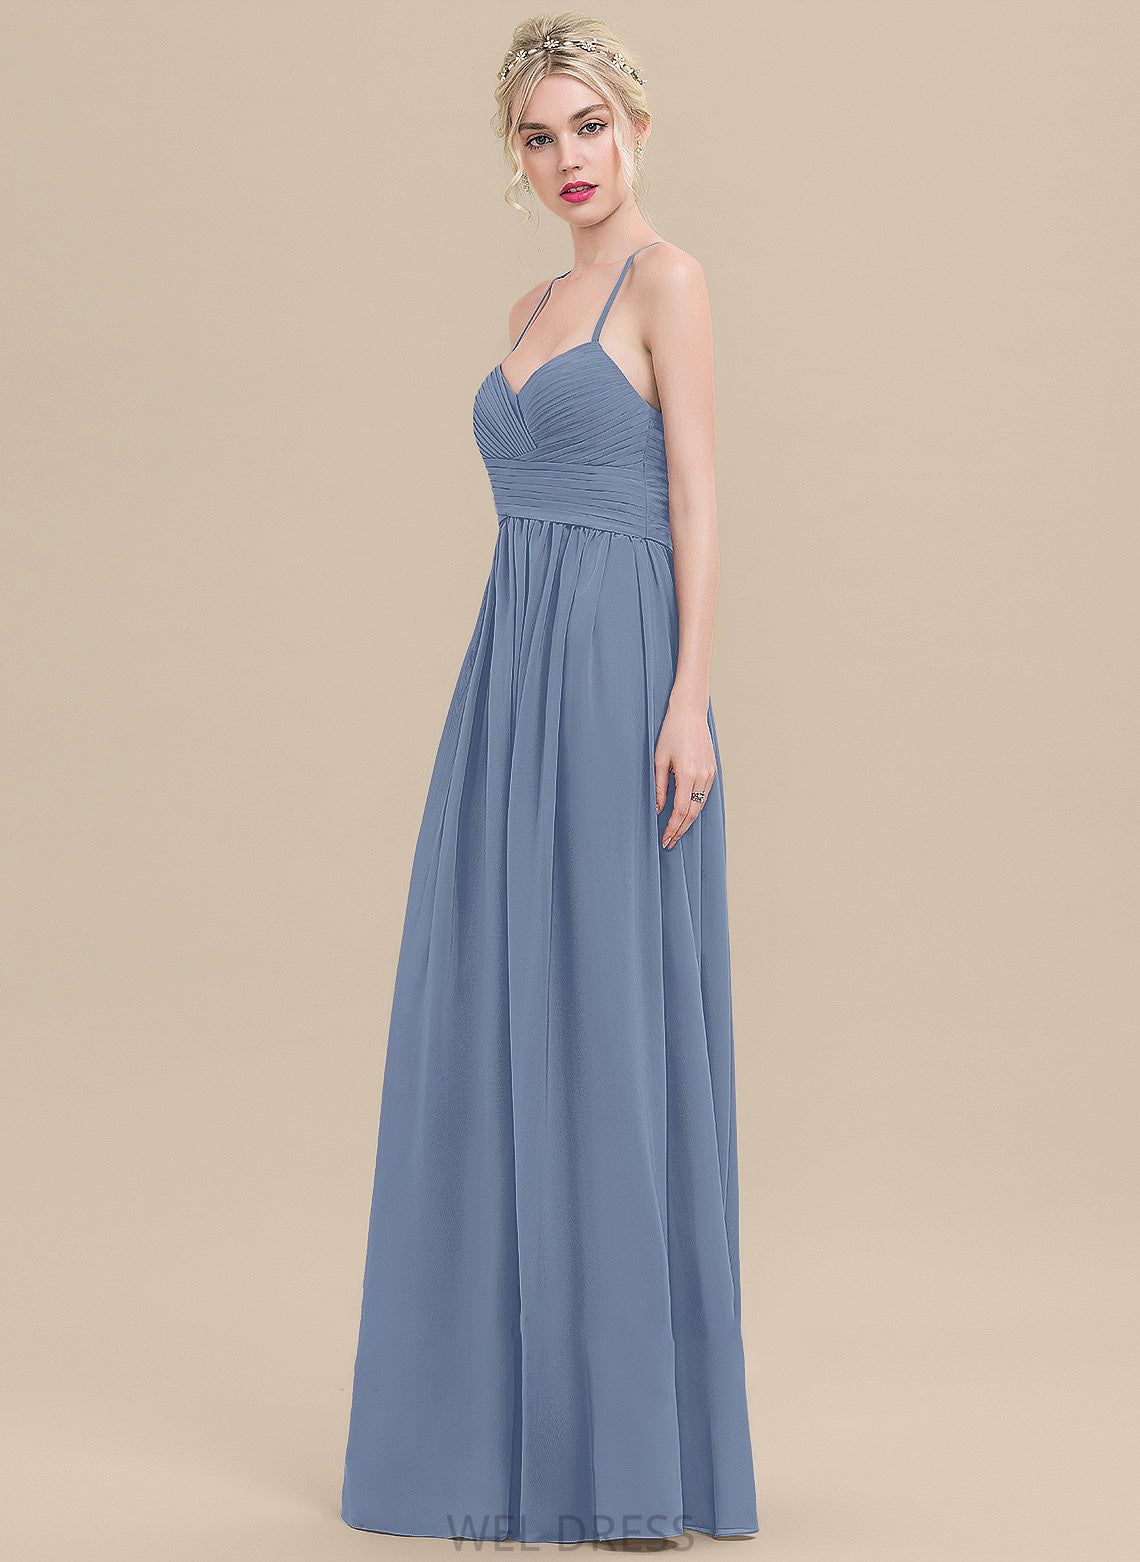 A-Line With Marie Sweetheart Floor-Length Ruffle Prom Dresses Chiffon